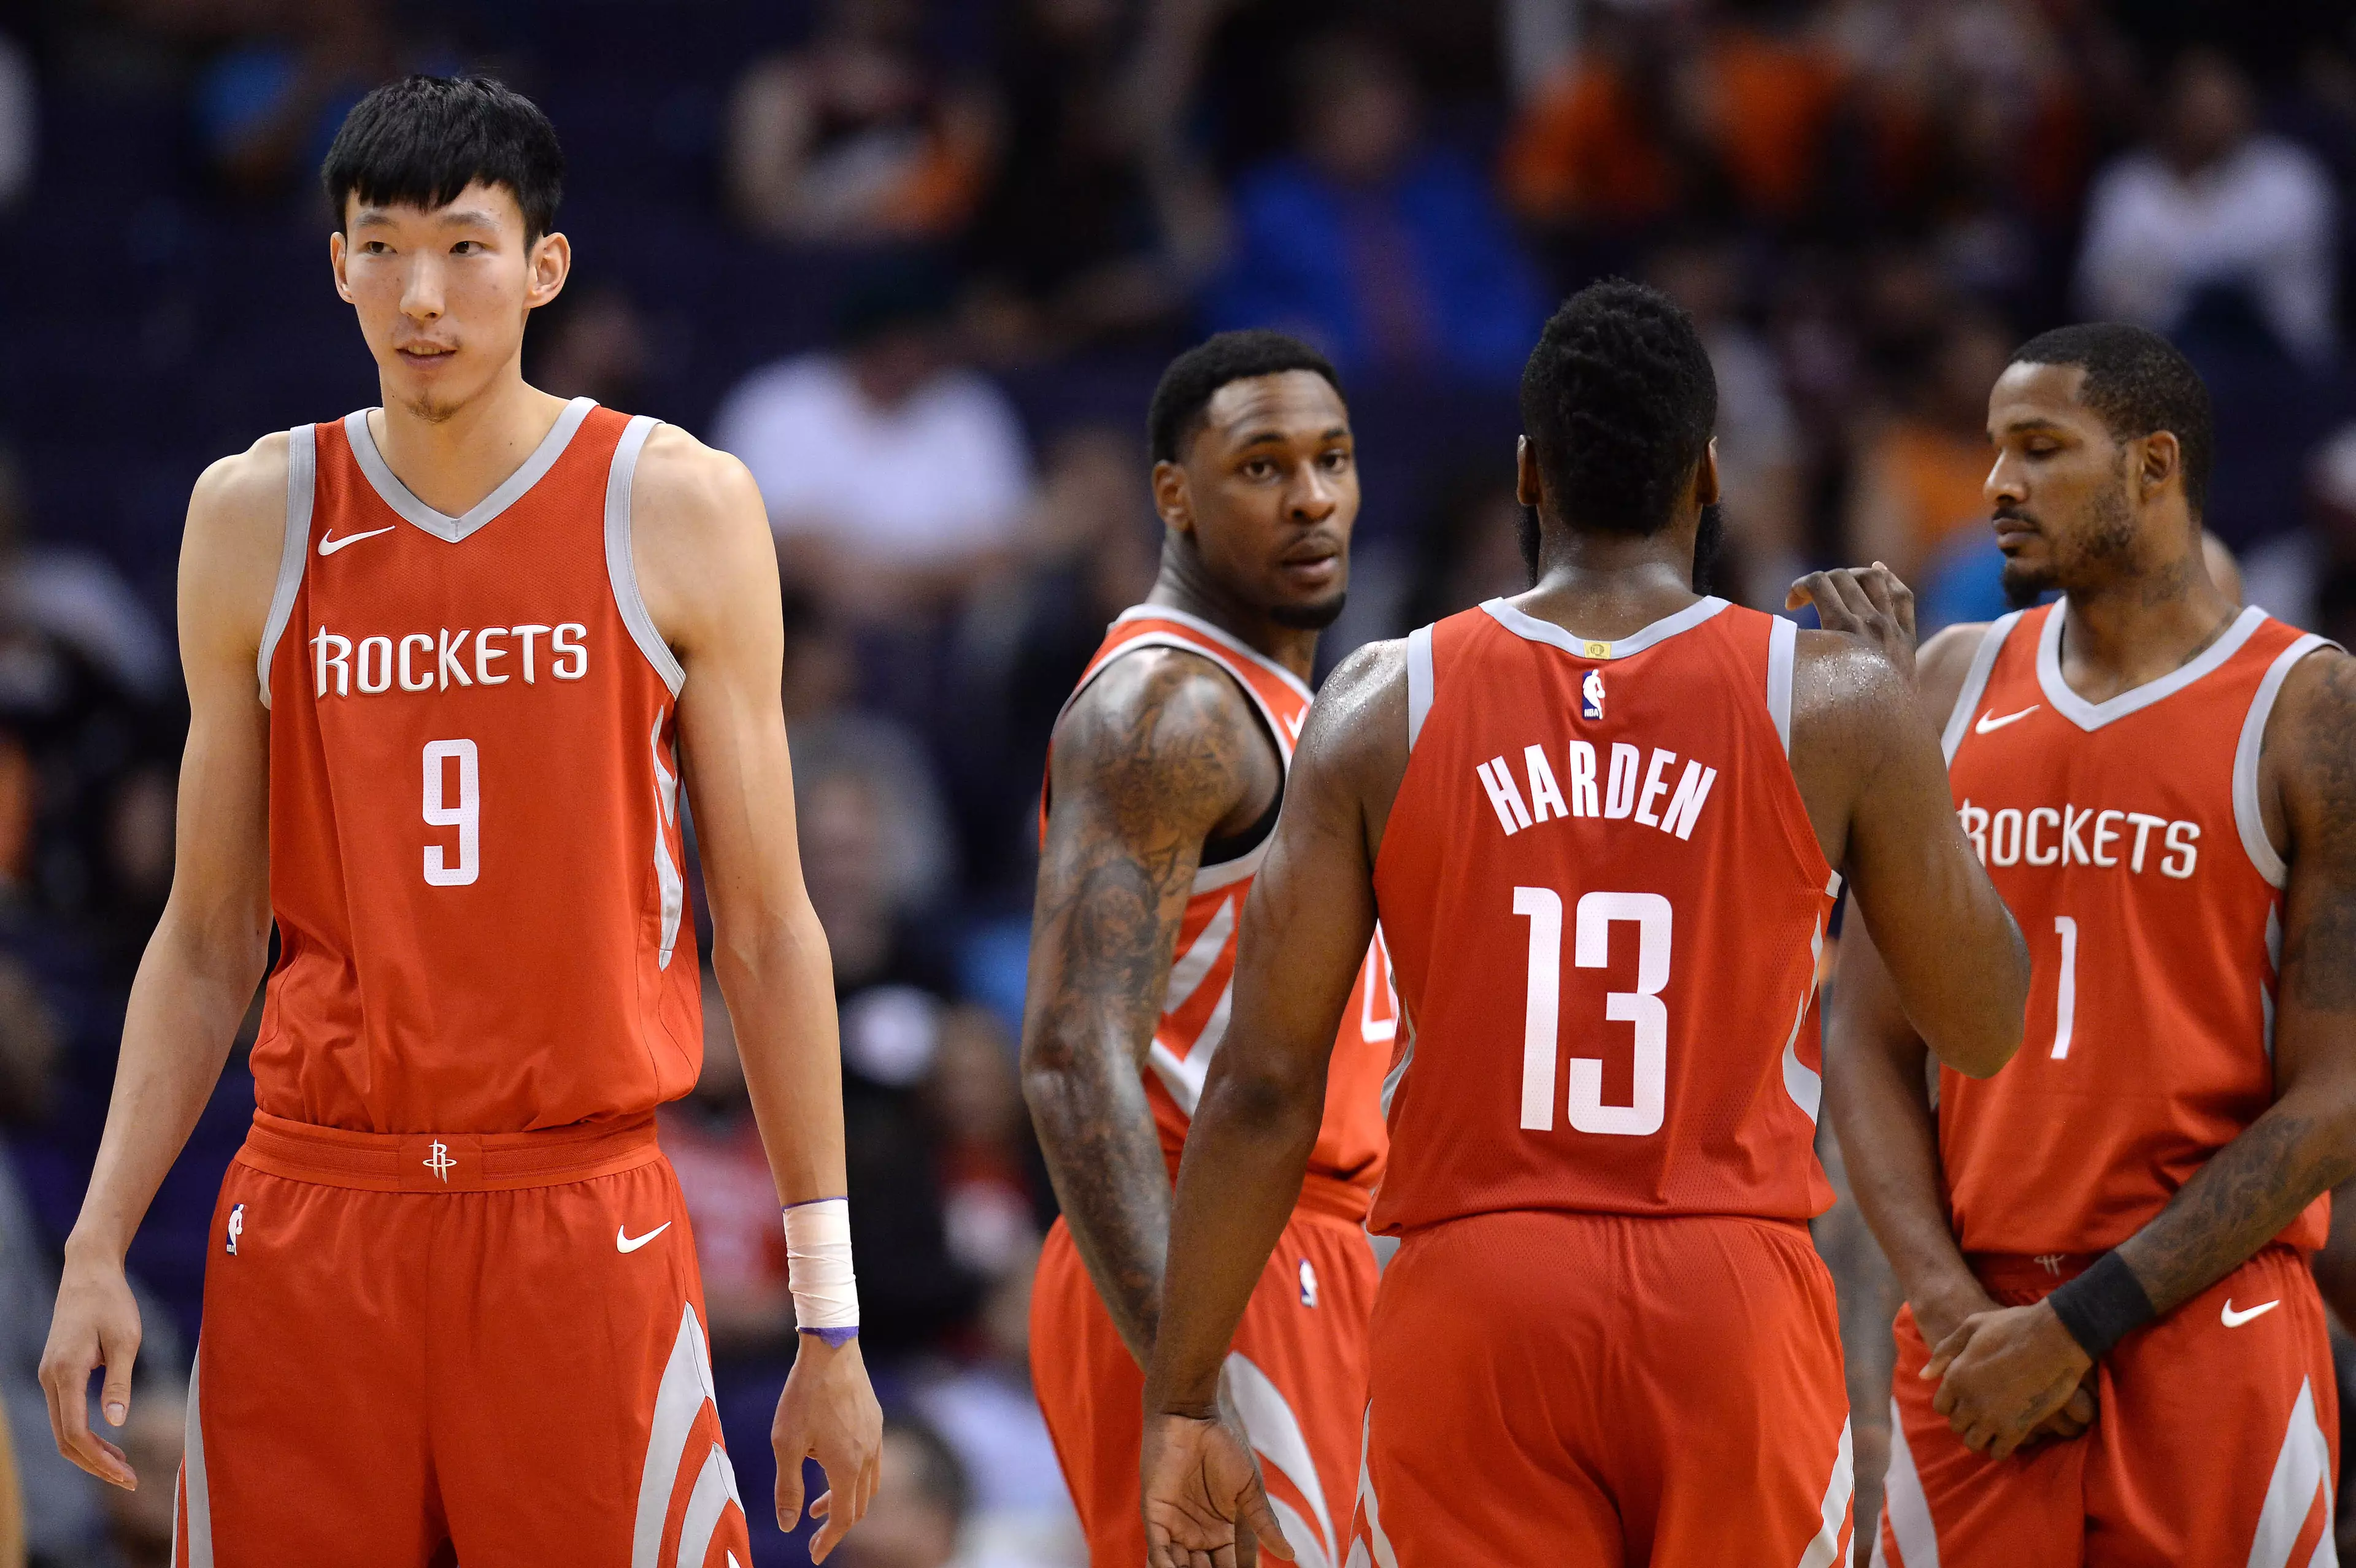 Zhou Qi used to play for the Houston Rockets in the NBA.